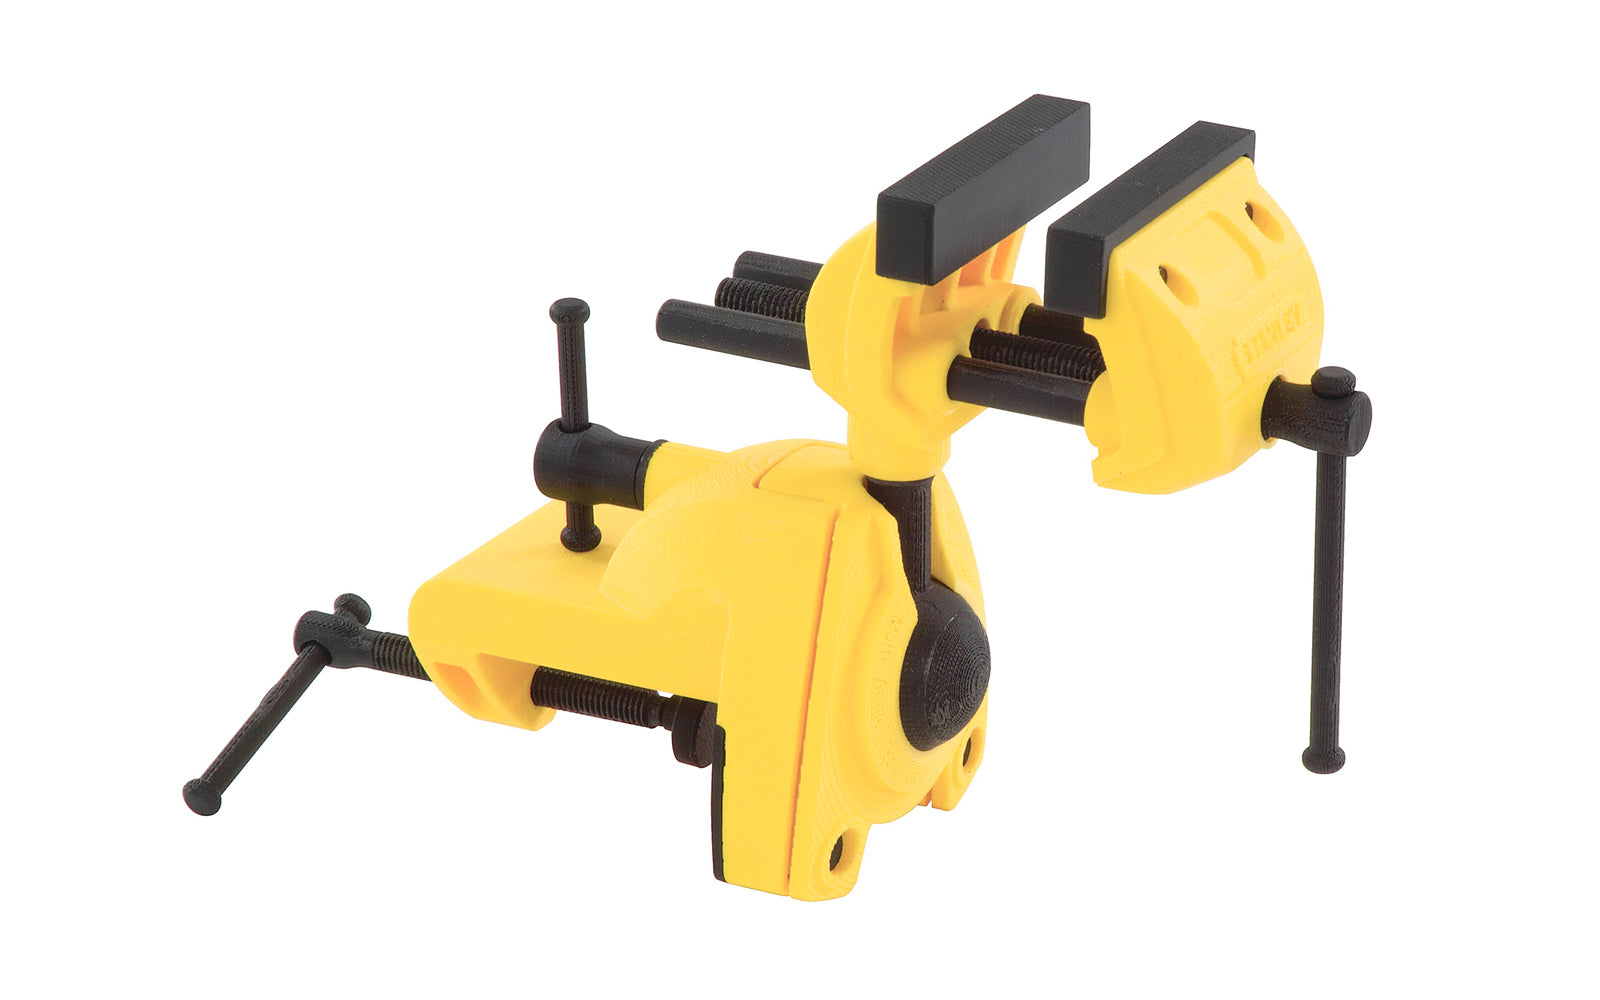 Model 83-069. 3" opening capacity. Multi-angle vise made by Stanley Tools. Swivel ball design allows for numerous lockable positions. Easily attaches to most work surfaces with integral screw clamp. Durable cast-aluminum & steel construction. Removable jaw pads protect surfaces from marring & damage. 076174830699